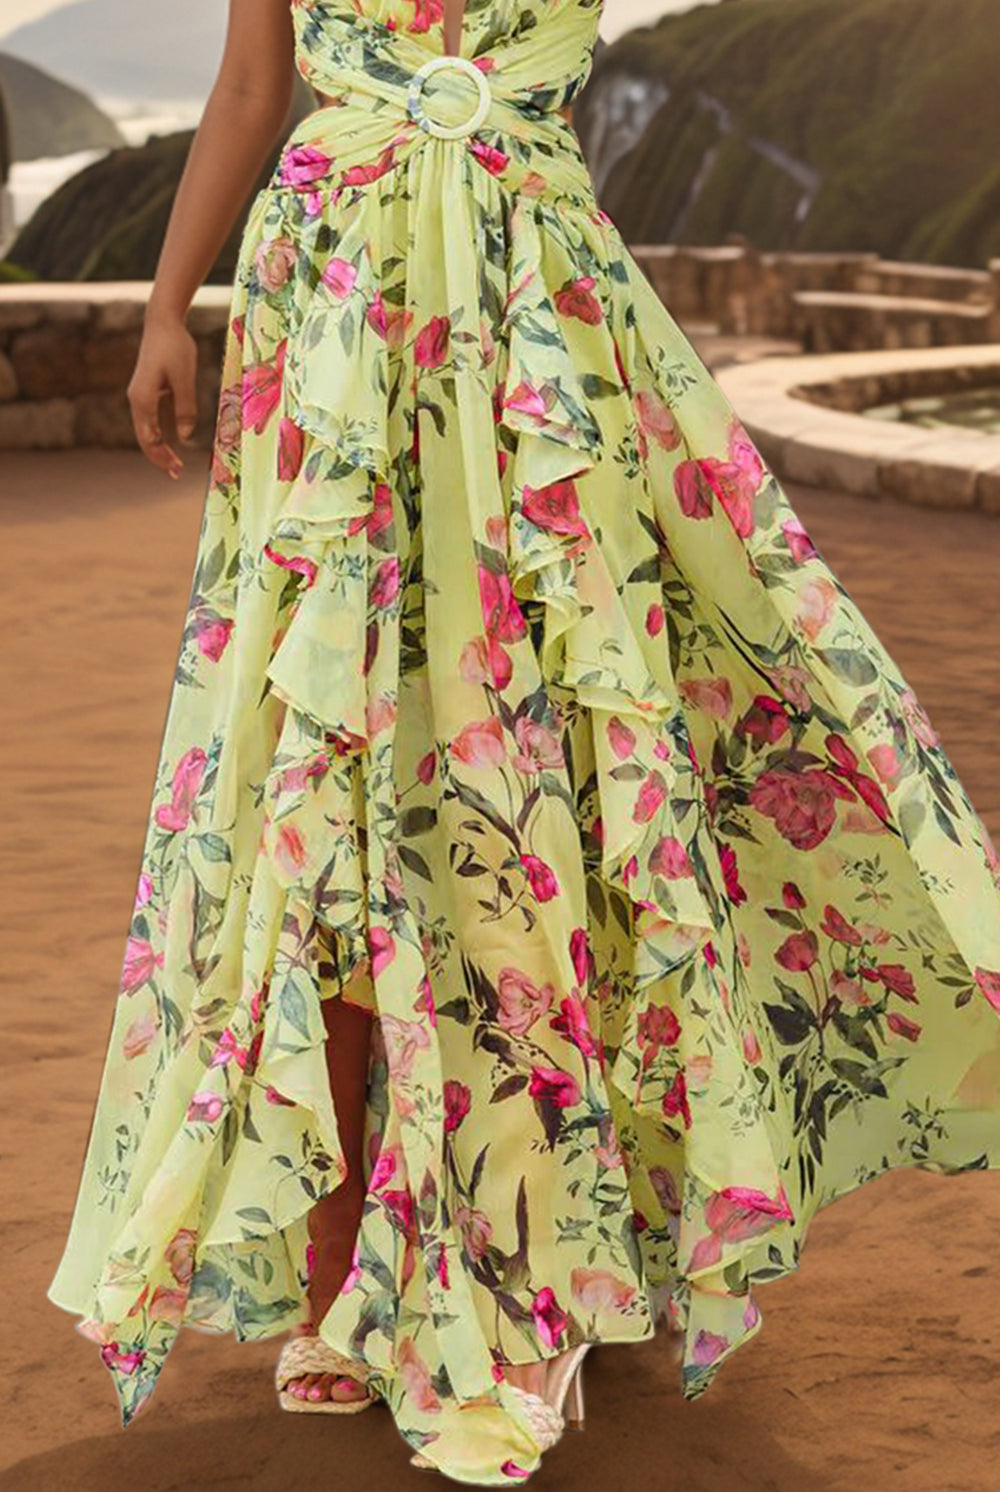 A woman stands poised against a sunset backdrop, wearing an elegant sleeveless maxi dress adorned with a vibrant floral pattern in shades of pink and green. The dress features a plunging neckline, cinched waist with a decorative ring detail, and a flowing ruffled skirt, embodying a graceful summer evening aesthetic.